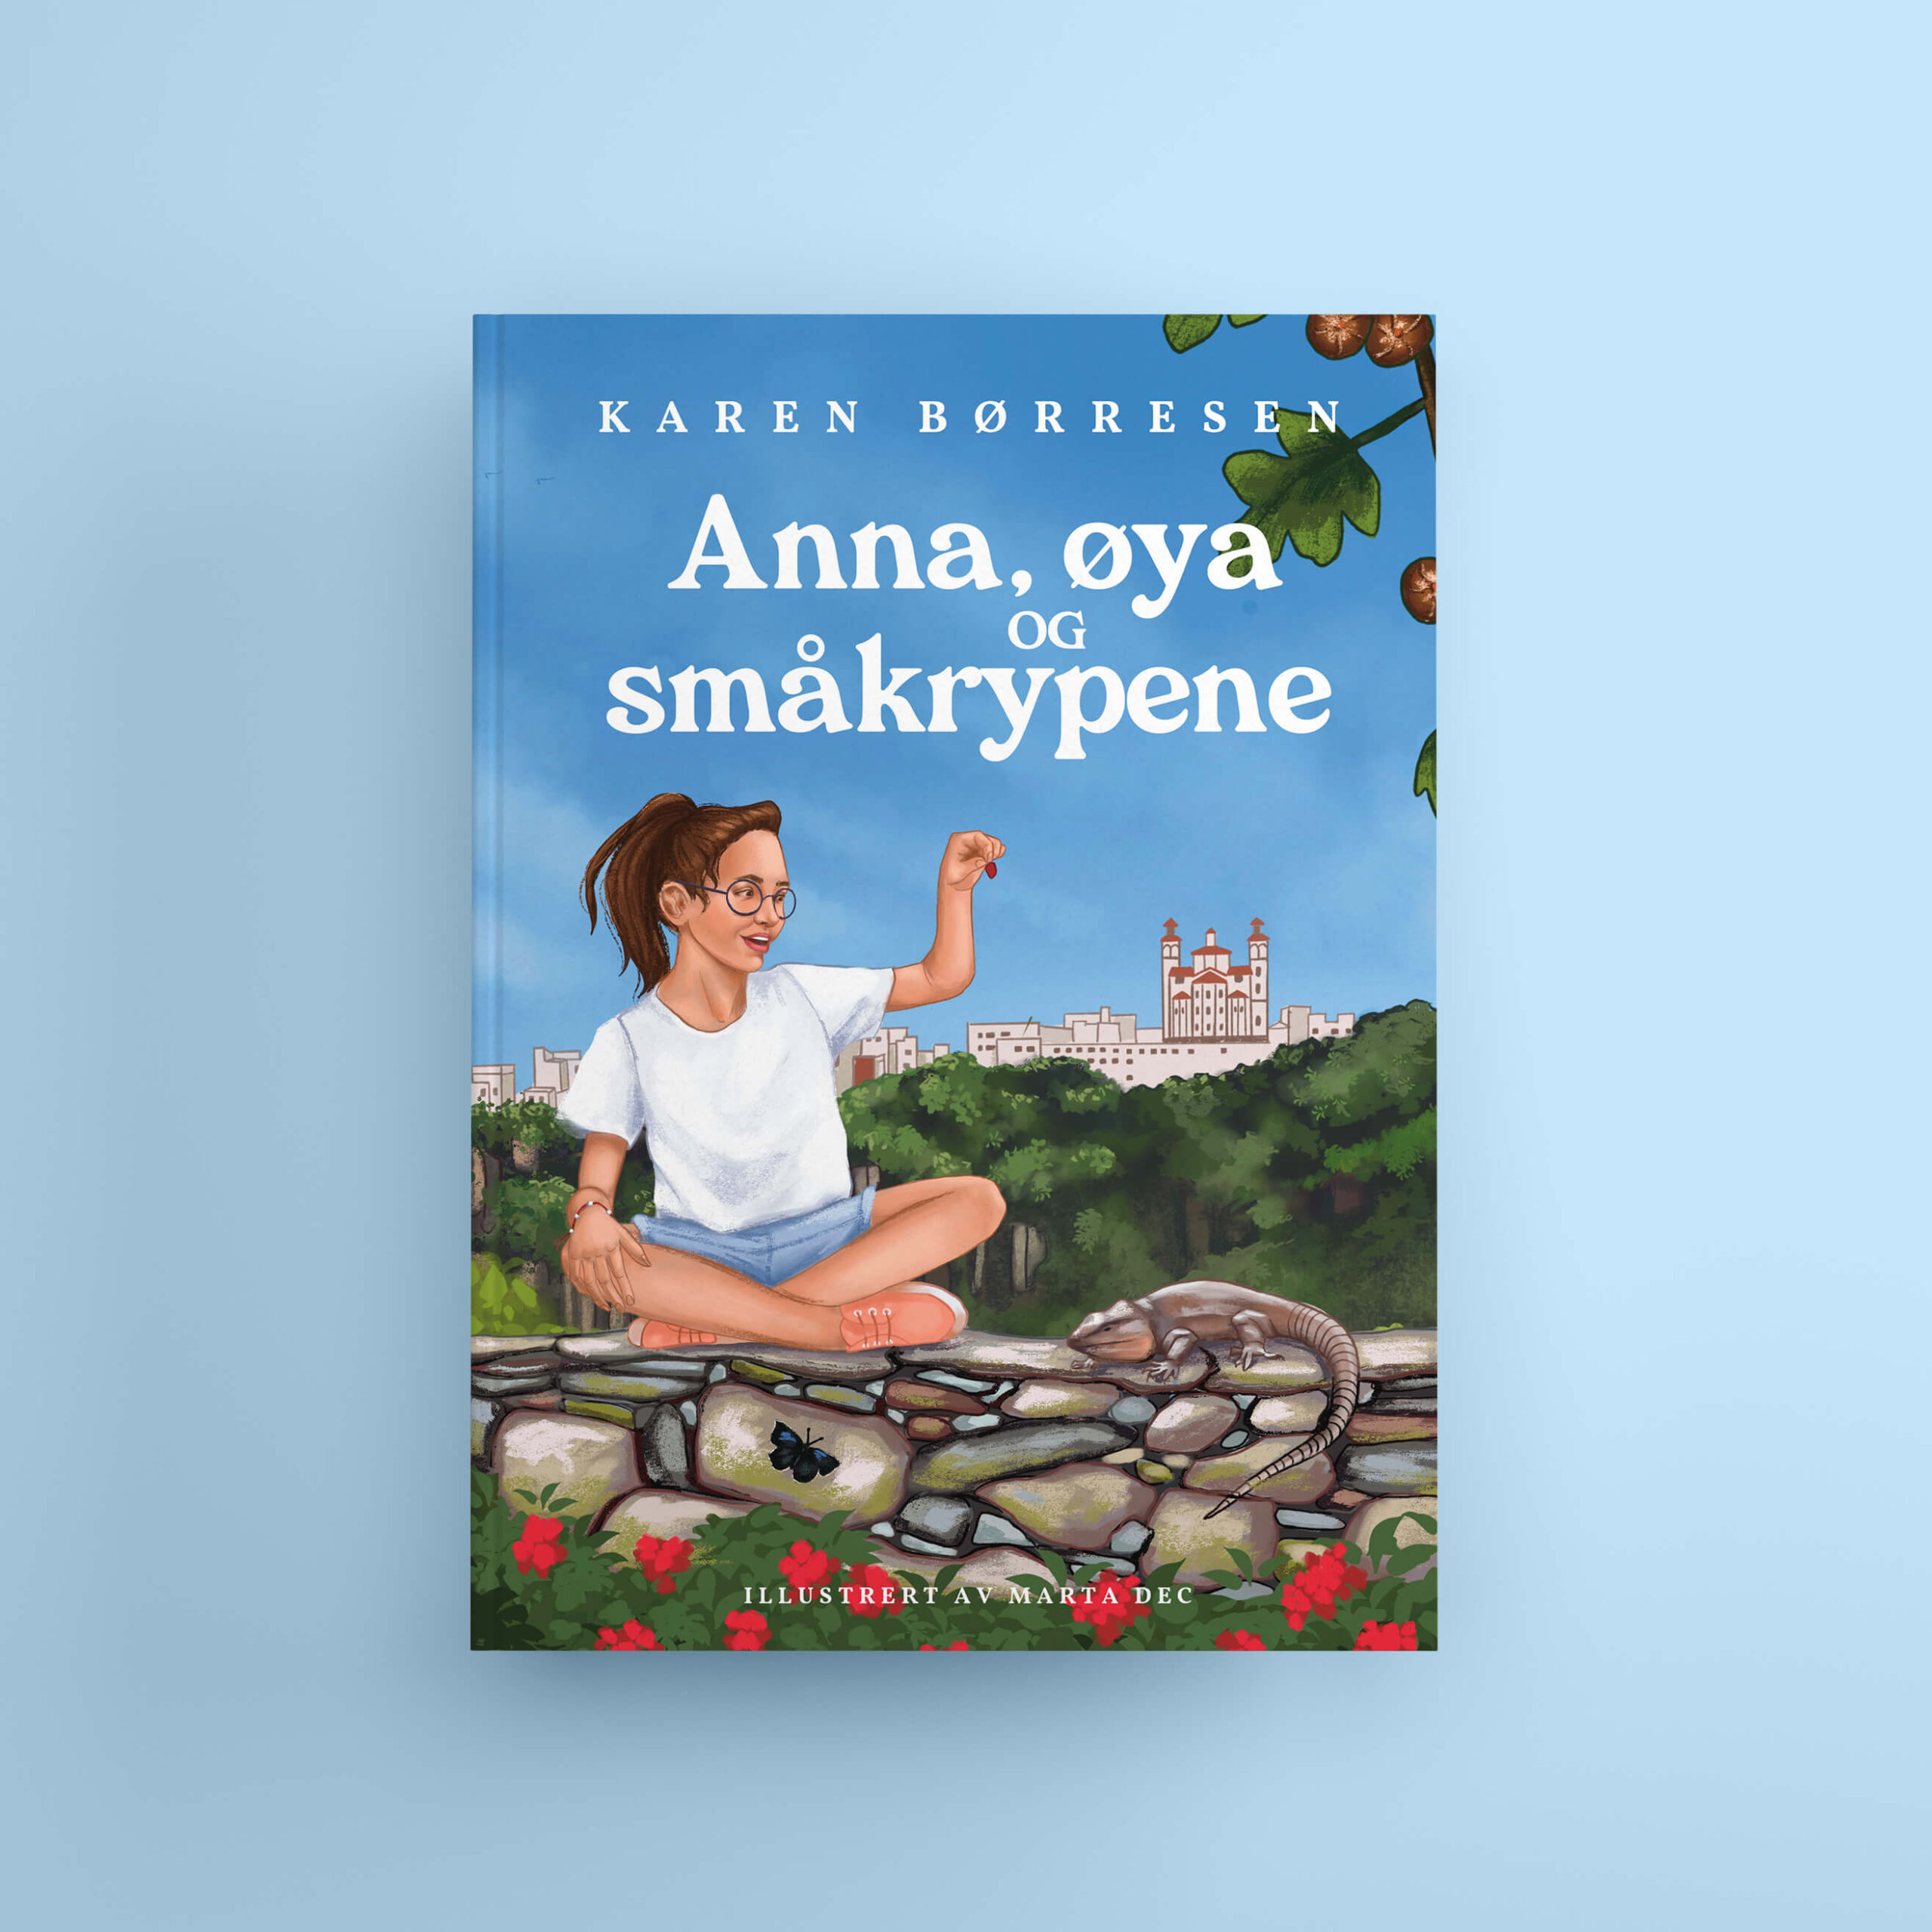 Cover of "Anna, øya og småkrypene", a children's book about a young girl discovering Canary Islands and various creatures.